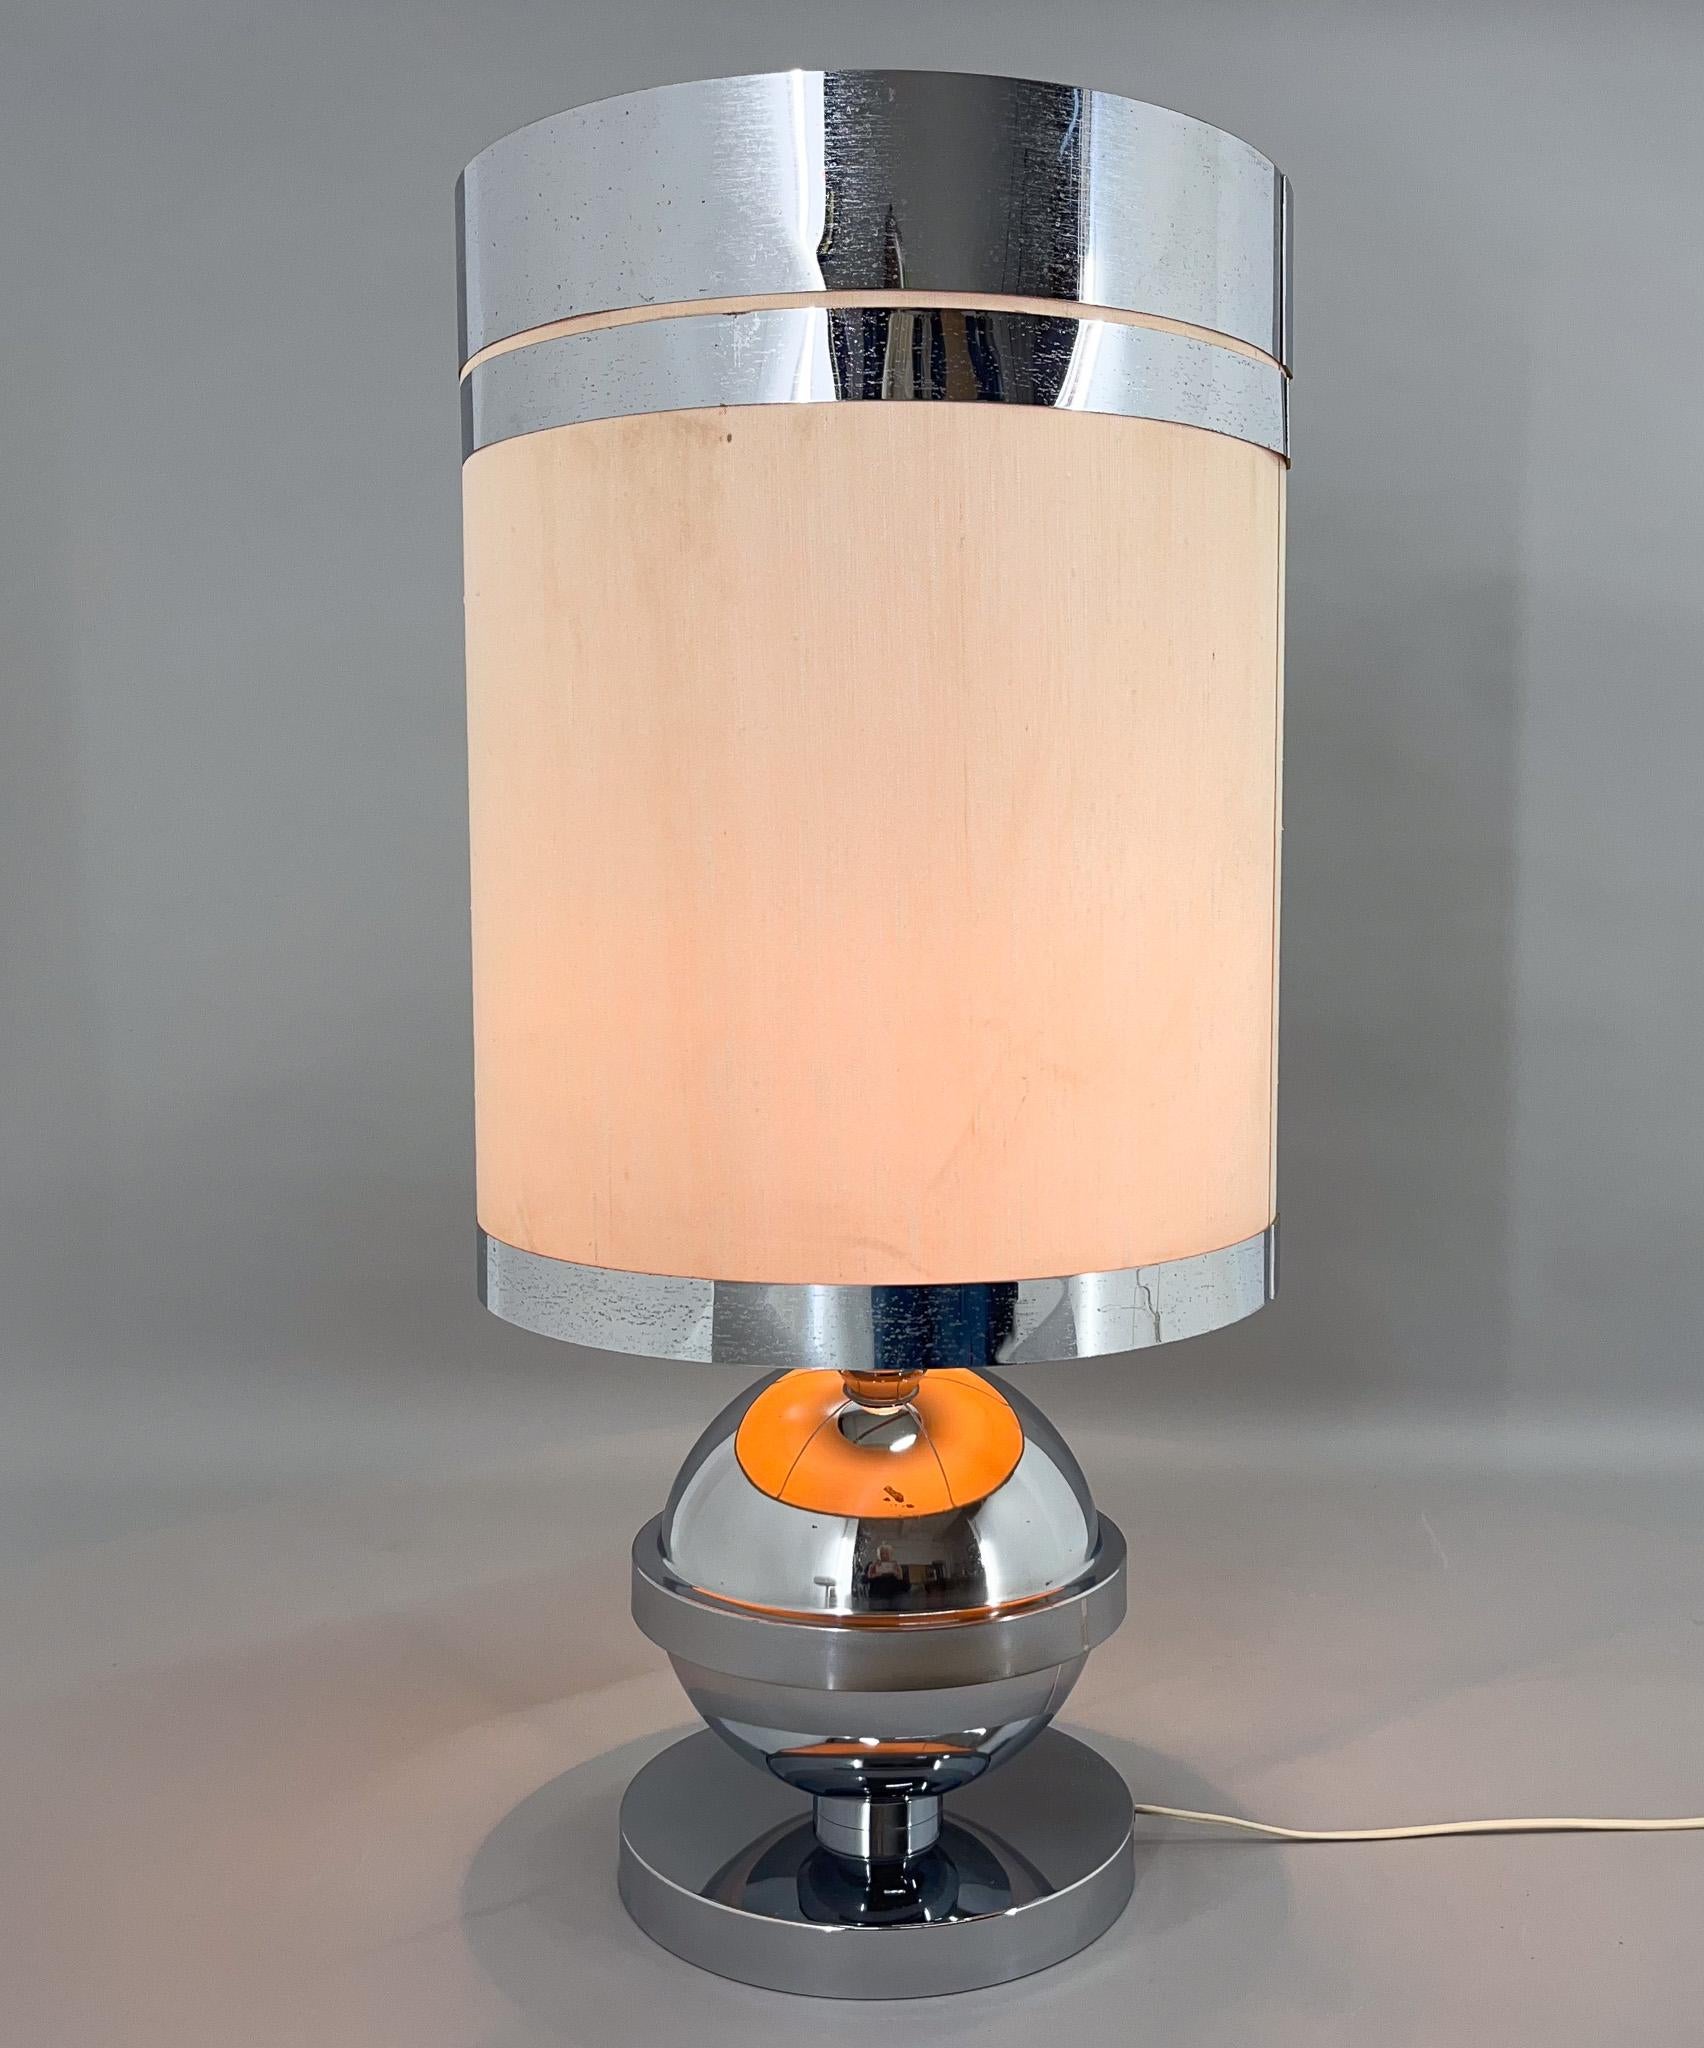 Large vintage table lamp made of chromed metal base and fabric lamp shade with thin chrome plated rim. Produced in Italy in the 1970's.US plug adapter included.